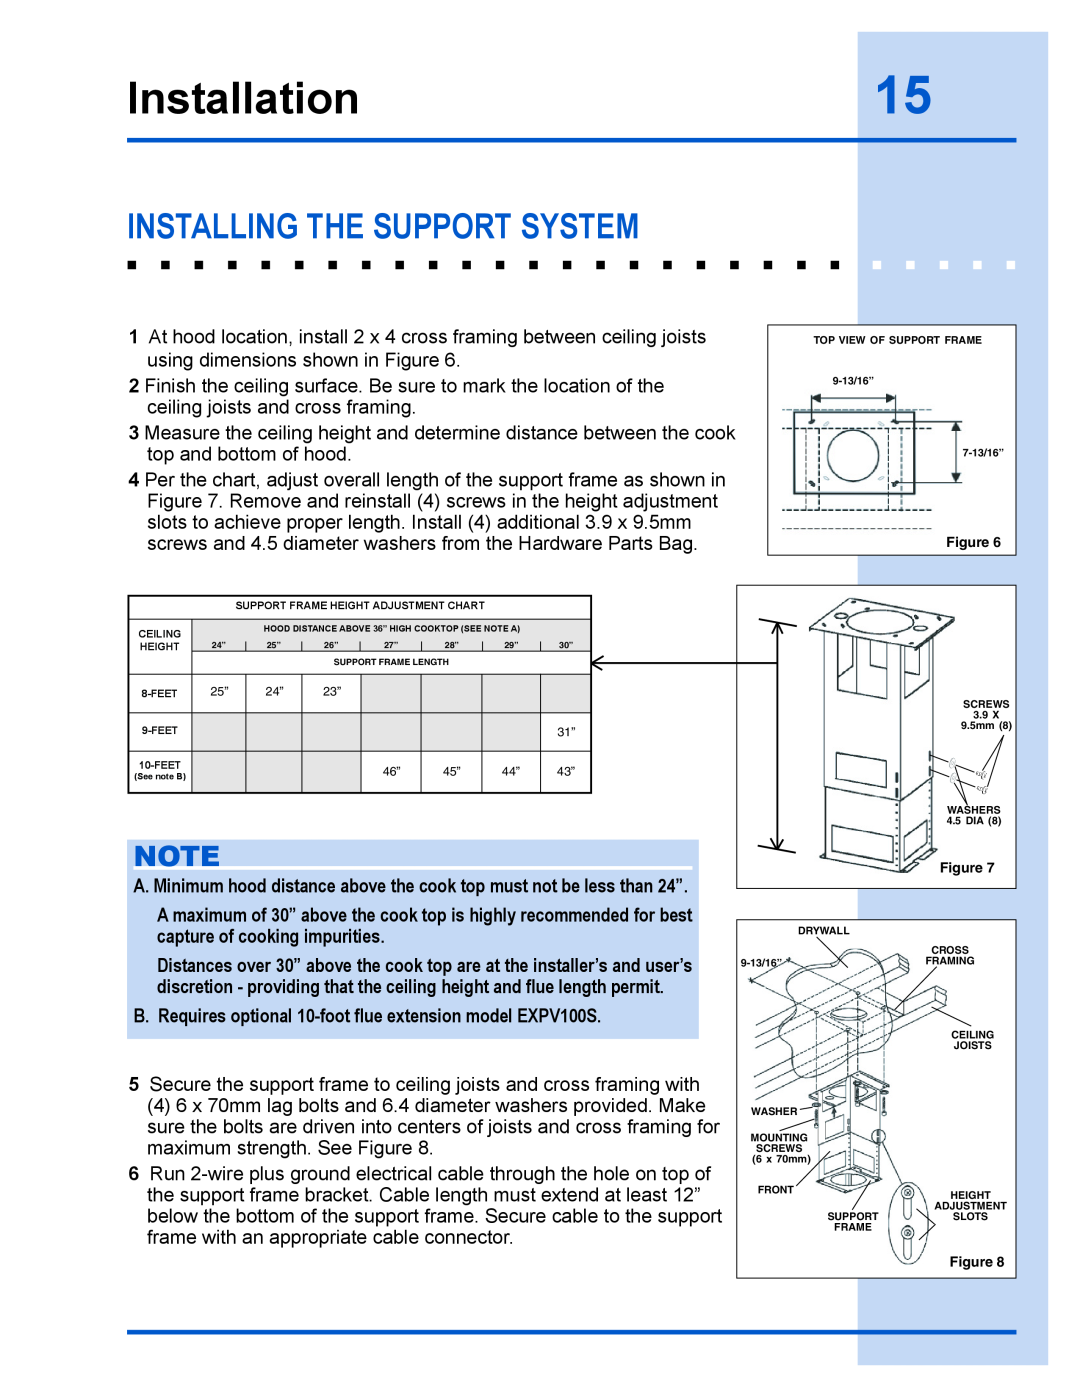 Electrolux E40PV100FS installation instructions Installation15, Installing The Support System 